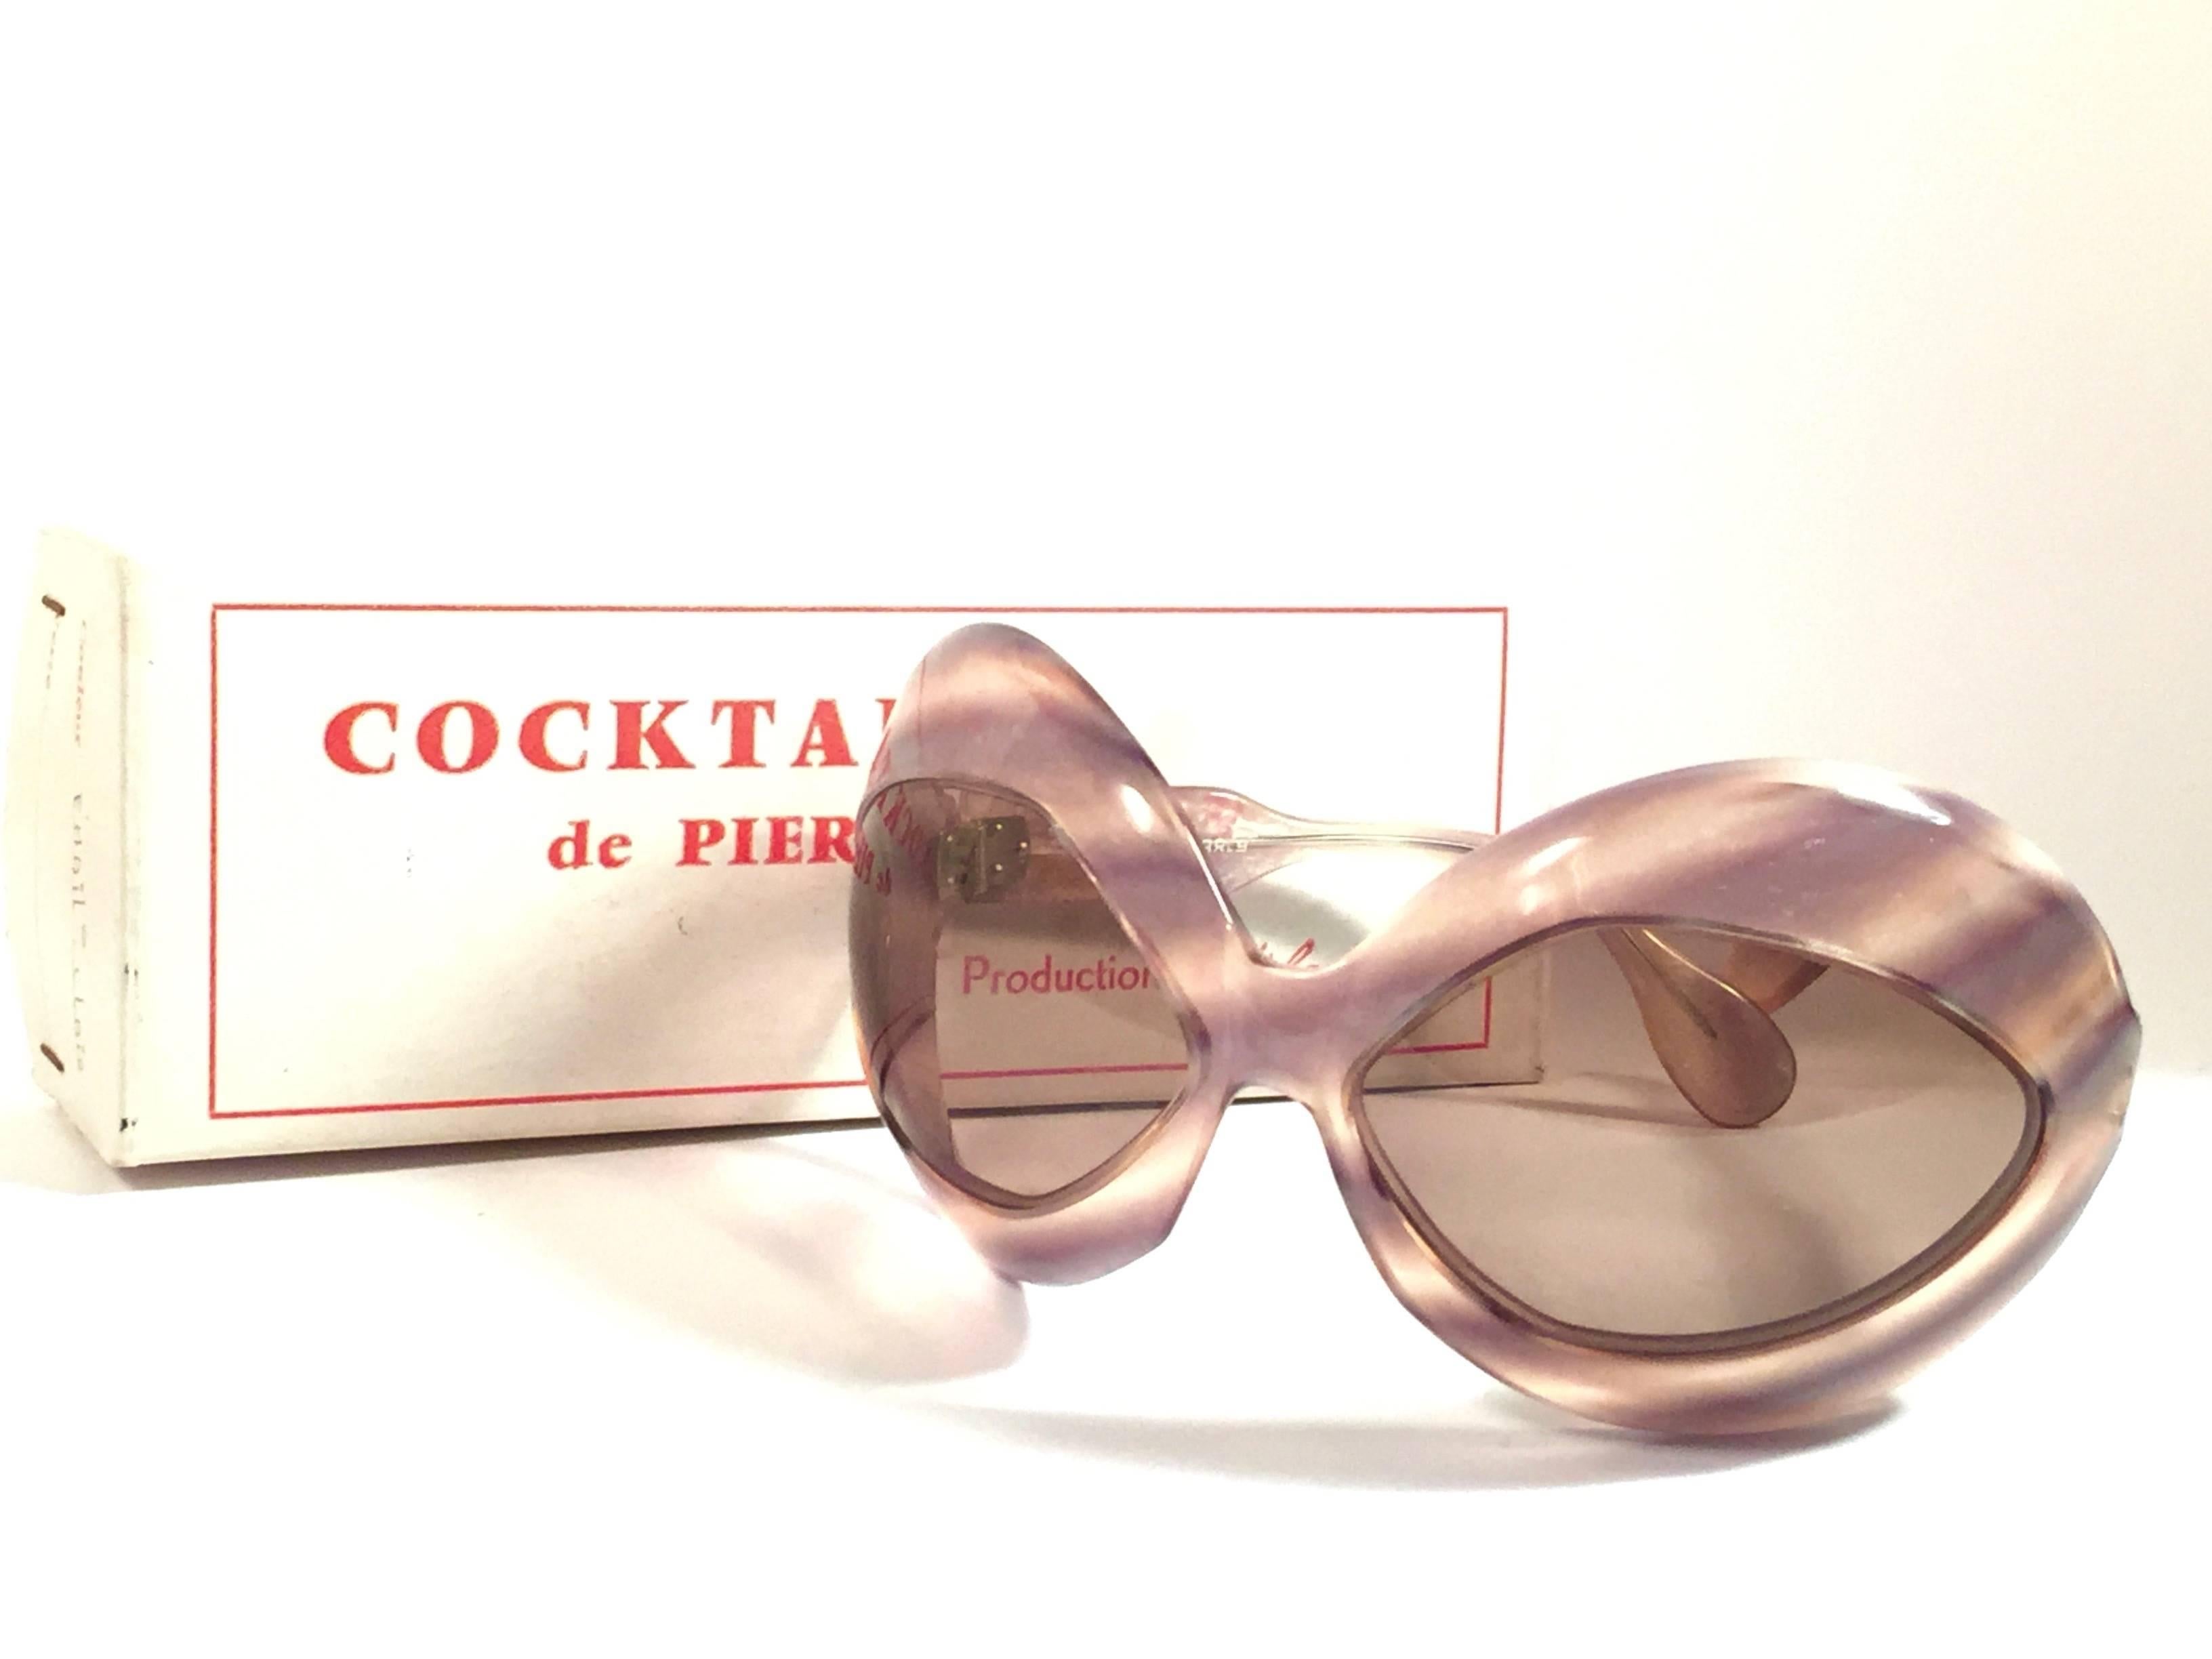 New Avant garde bug eyed frame " Pierre Marly “ Cocktail “ sunglasses.  Spotless light brown lenses. Amazing color straight from a super chic and crazy 1960’s Pierre Marly very own cocktail scene. The Very same model worn by Jackie Kennedy. 